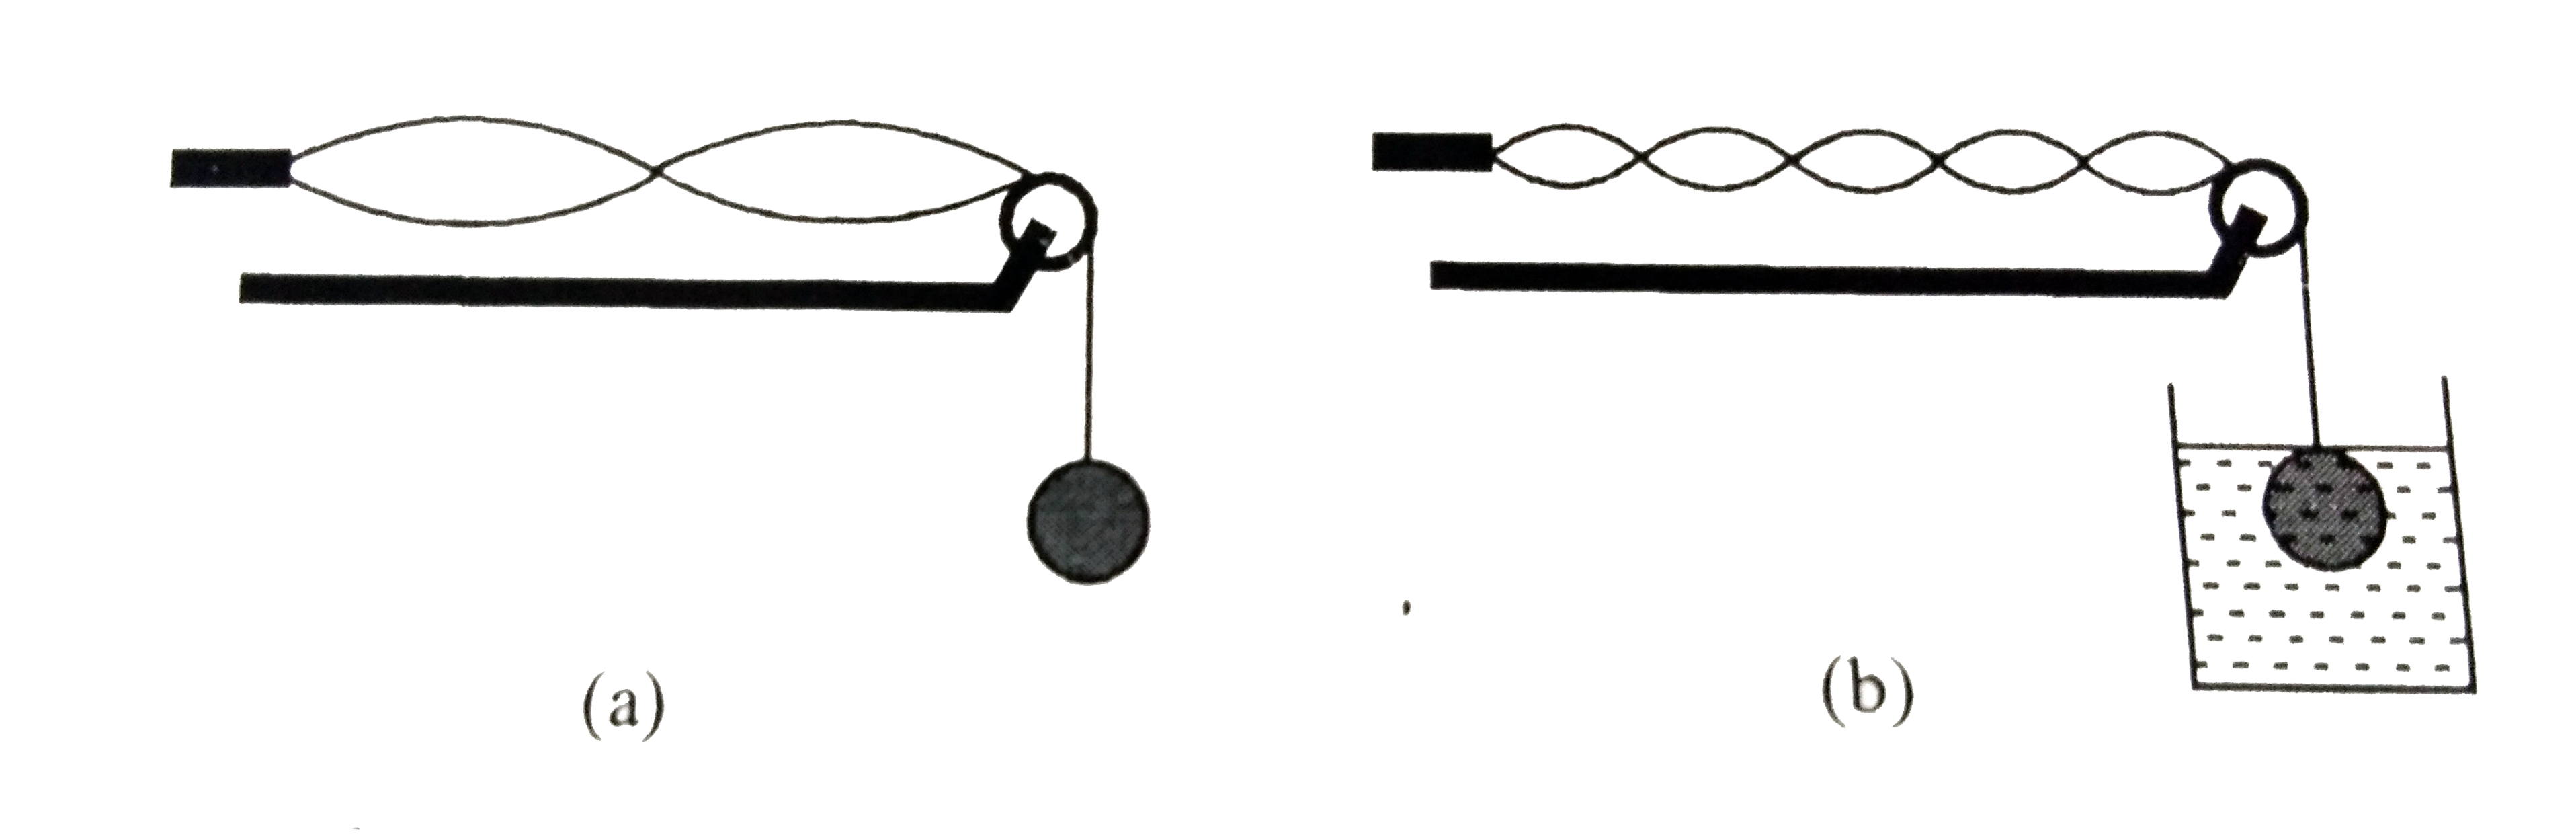 In example, by immersing the hanging sphere in water, the buoyand force changes the tension the in the string so that the string vibrates in its fifth harmonic. Suppose you would like to make the string vibrate in its first harmonic. Instead of immersing the sphere in water, you should . (Assuming vibrator frequency remains the same )